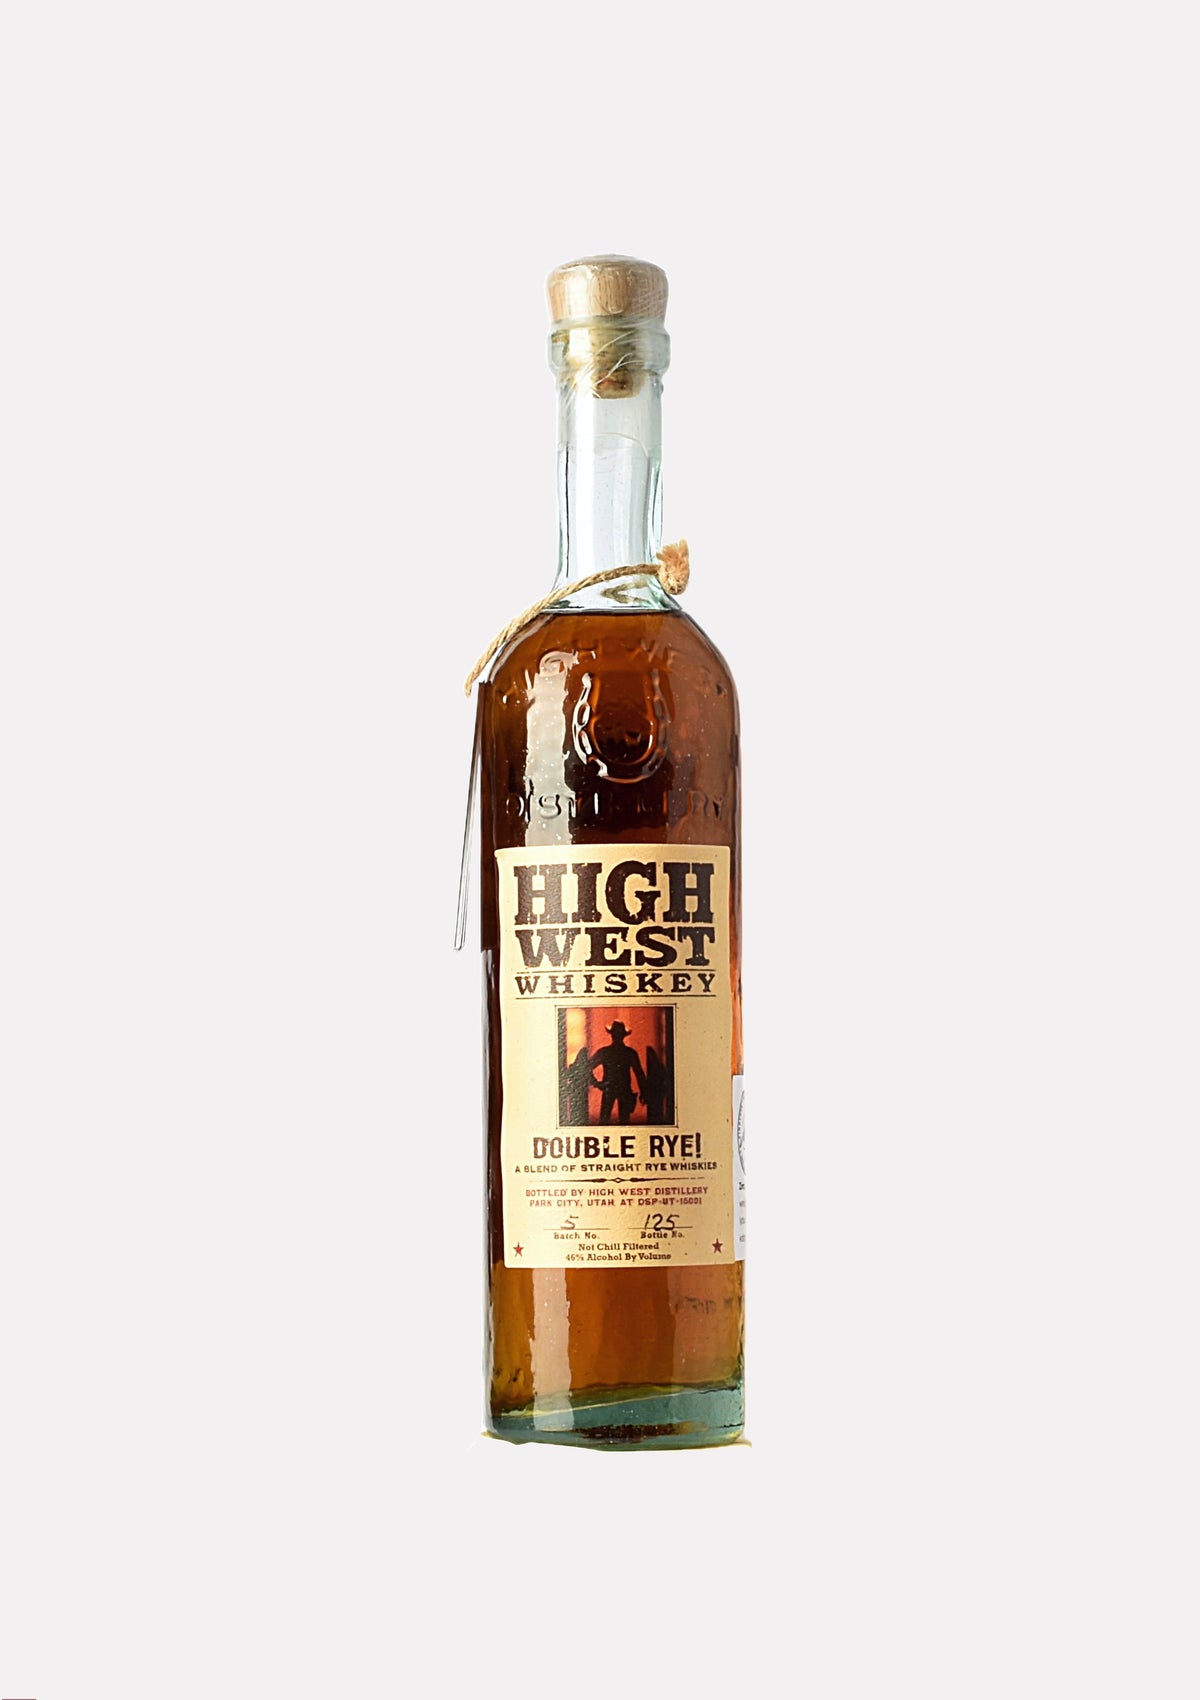 High West Double Rye A Blend of Straight Rye Whiskies Batch 5